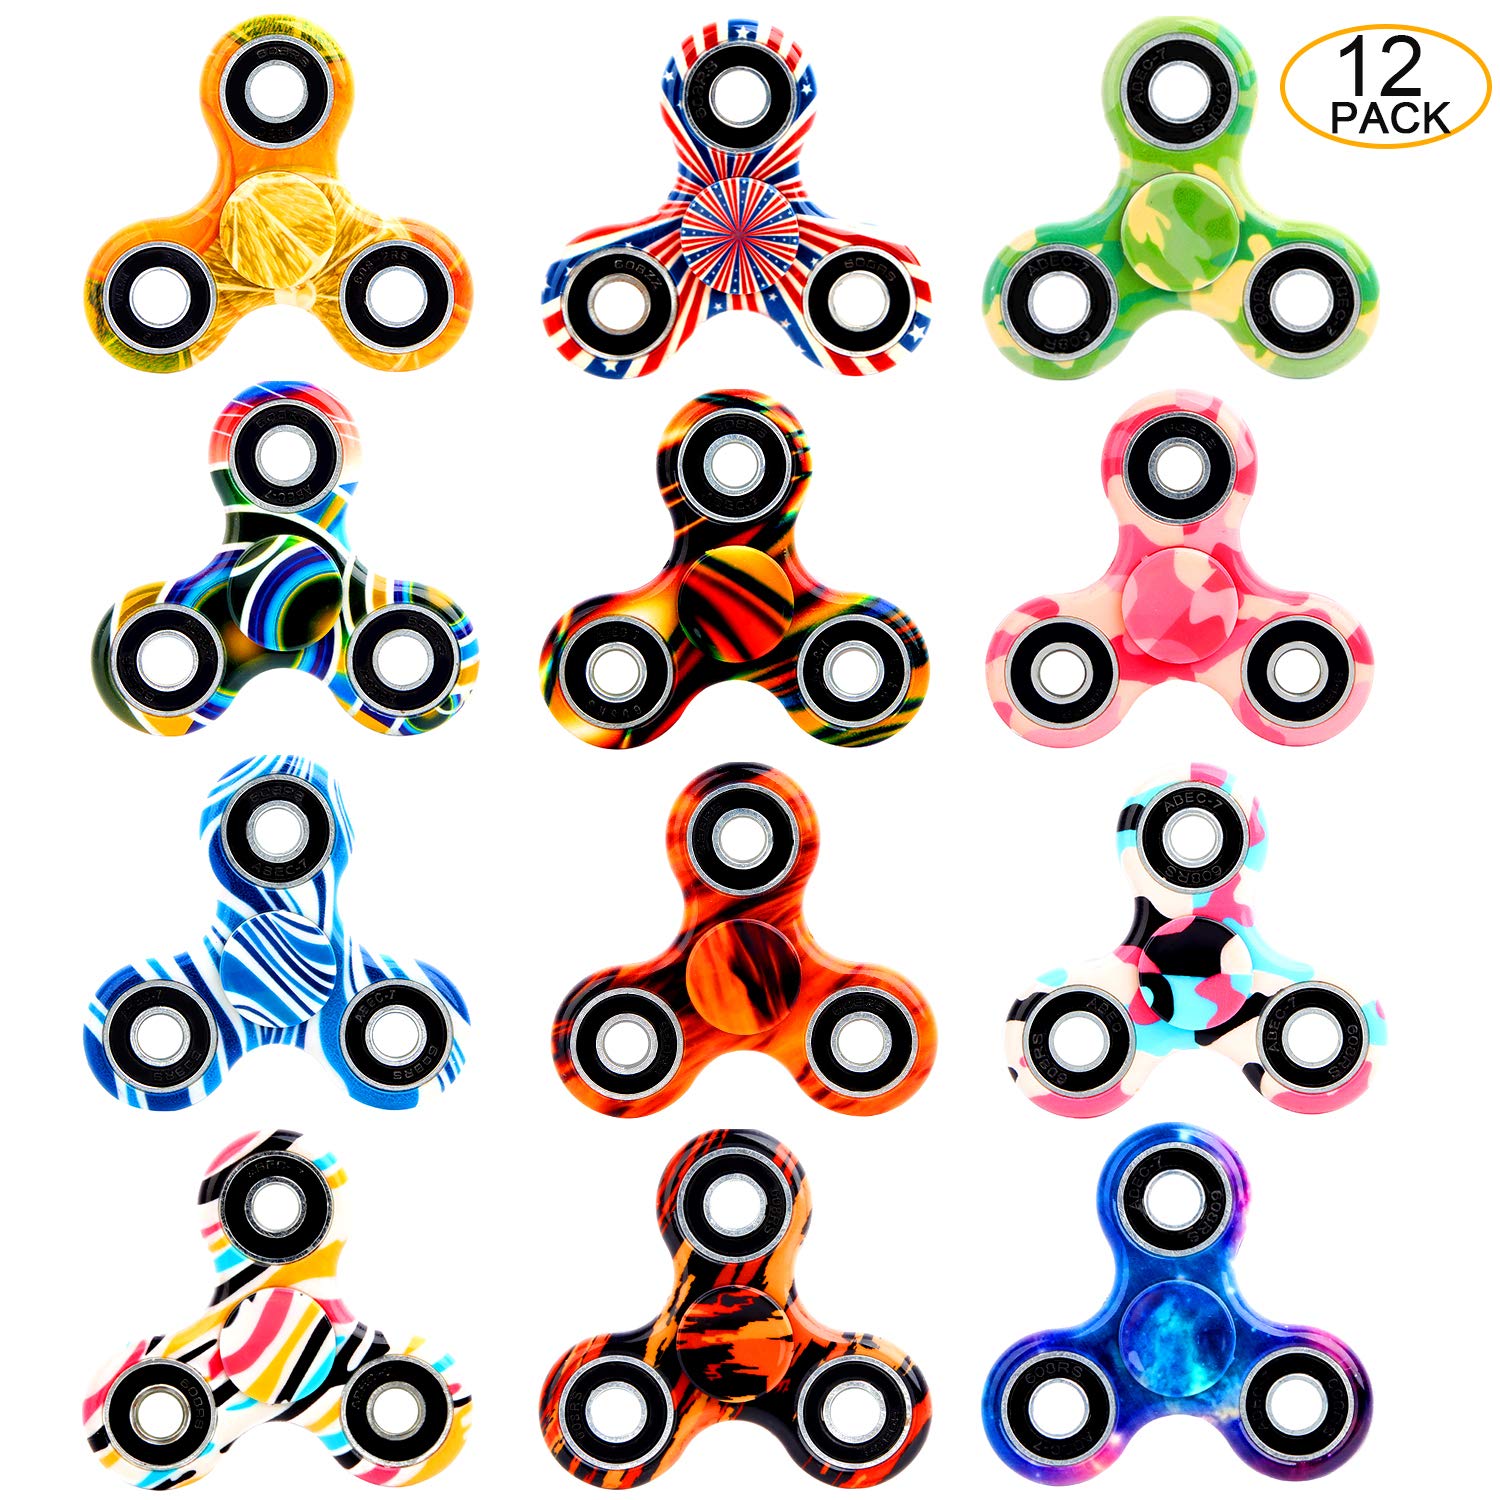 SCIONE Fidget Spinner 12 Pack ADHD Stress Relief Anxiety Toys Best Autism Fidgets Spinners